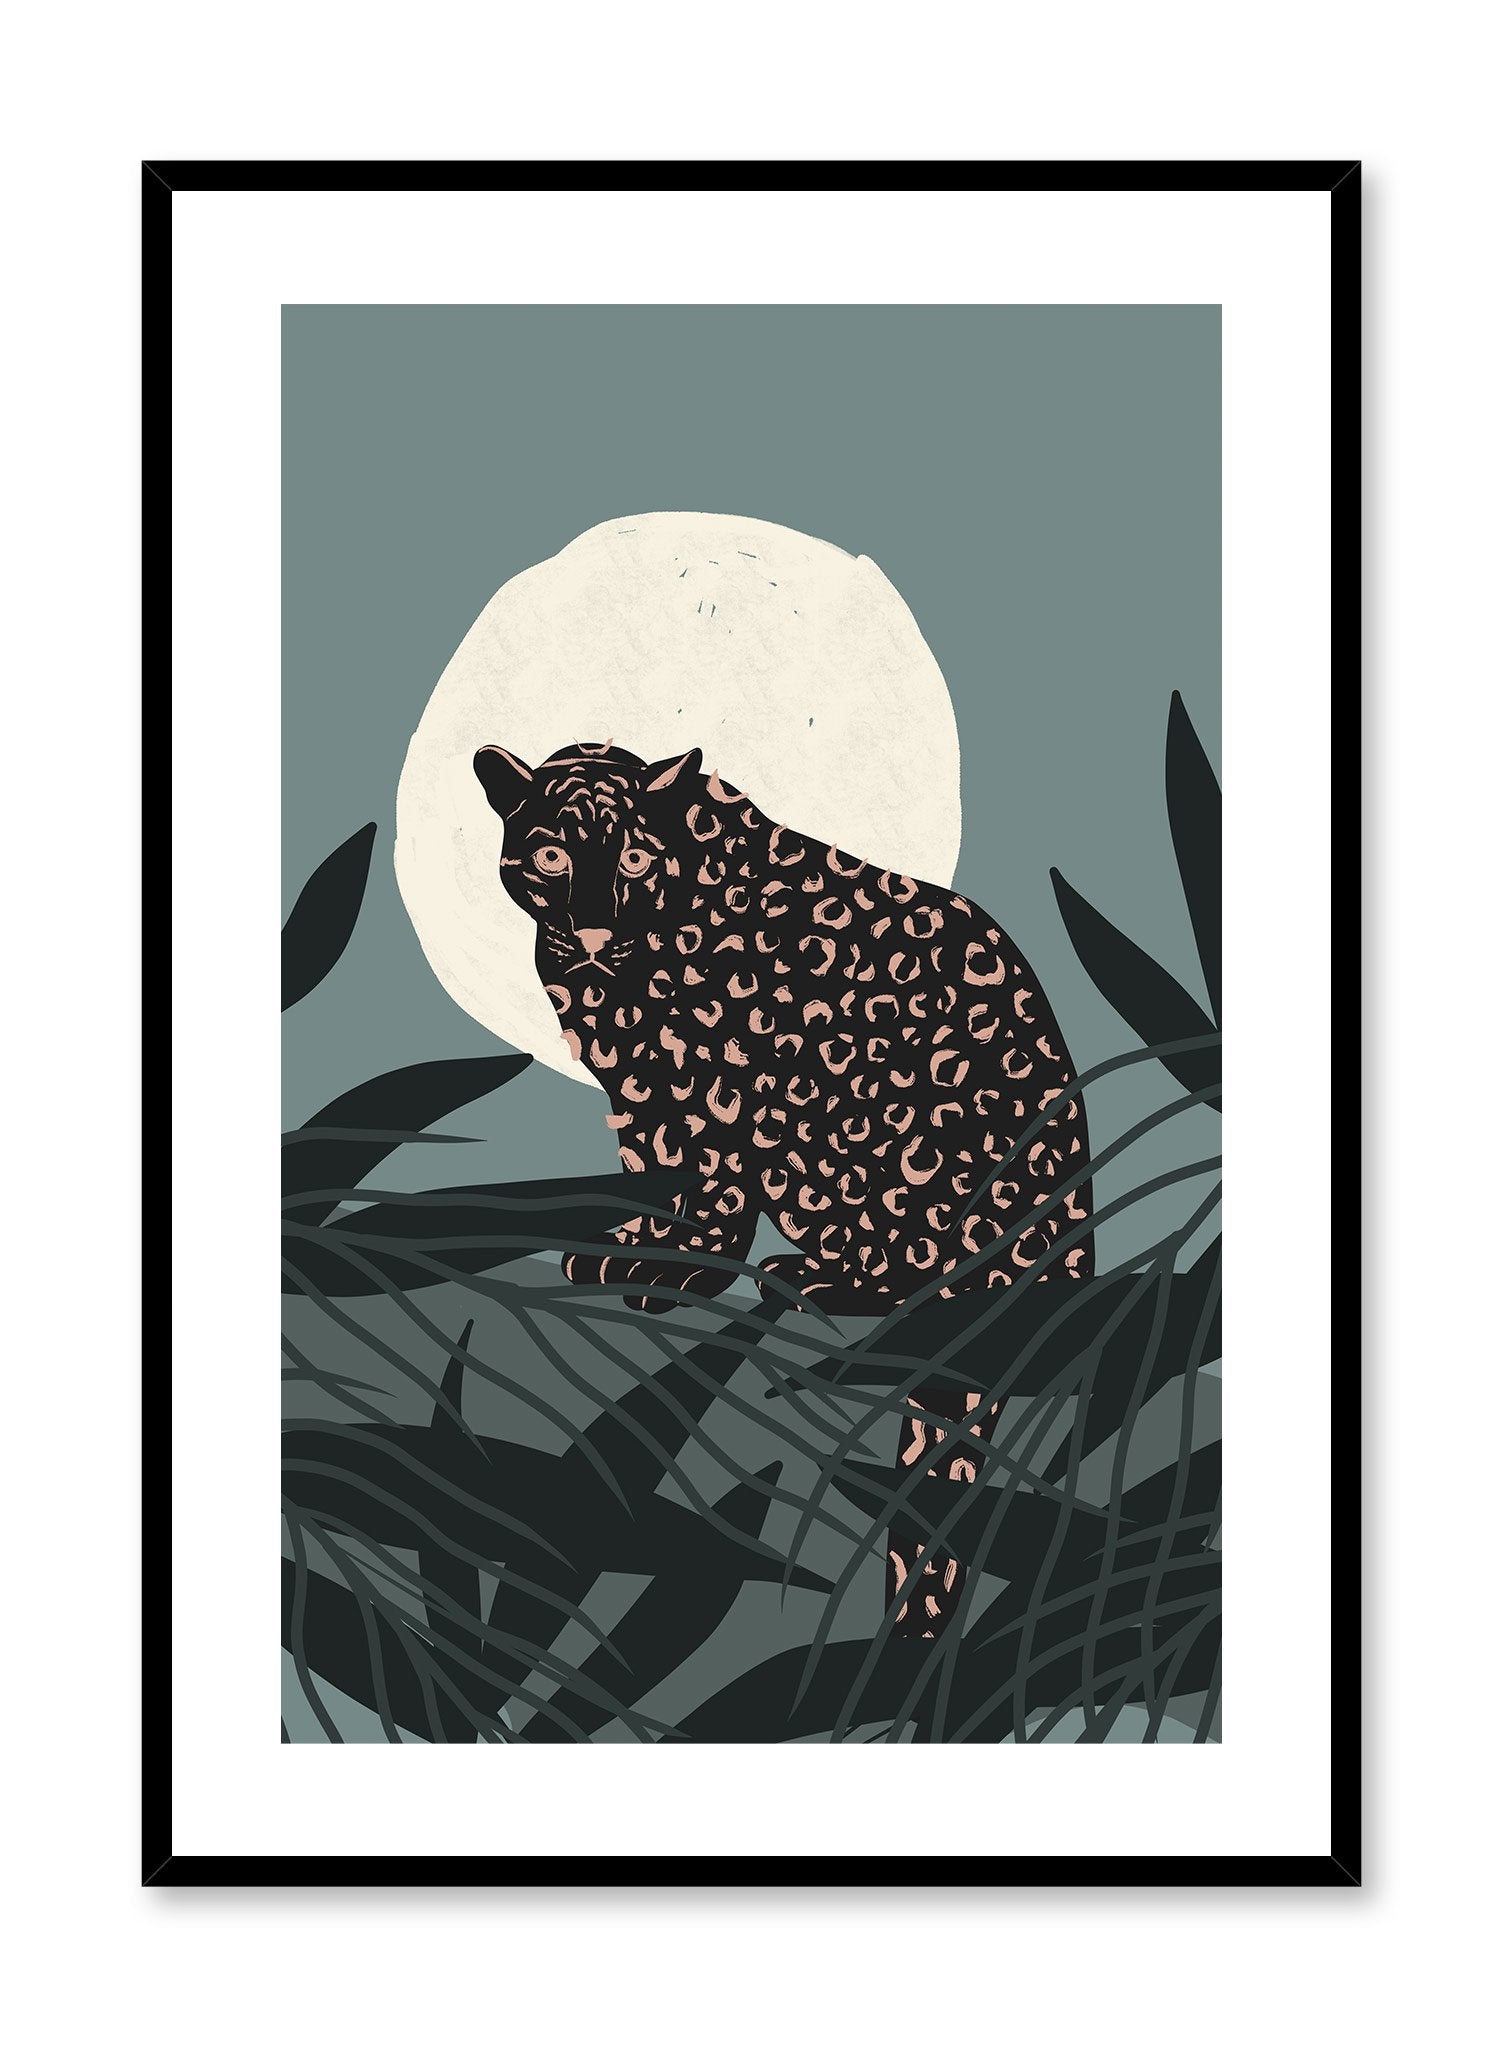 Cheetah in the Moonlight is a minimalist illustration of a fierce cheetah staring at the observer while standing in front of a full moon by Opposite Wall.